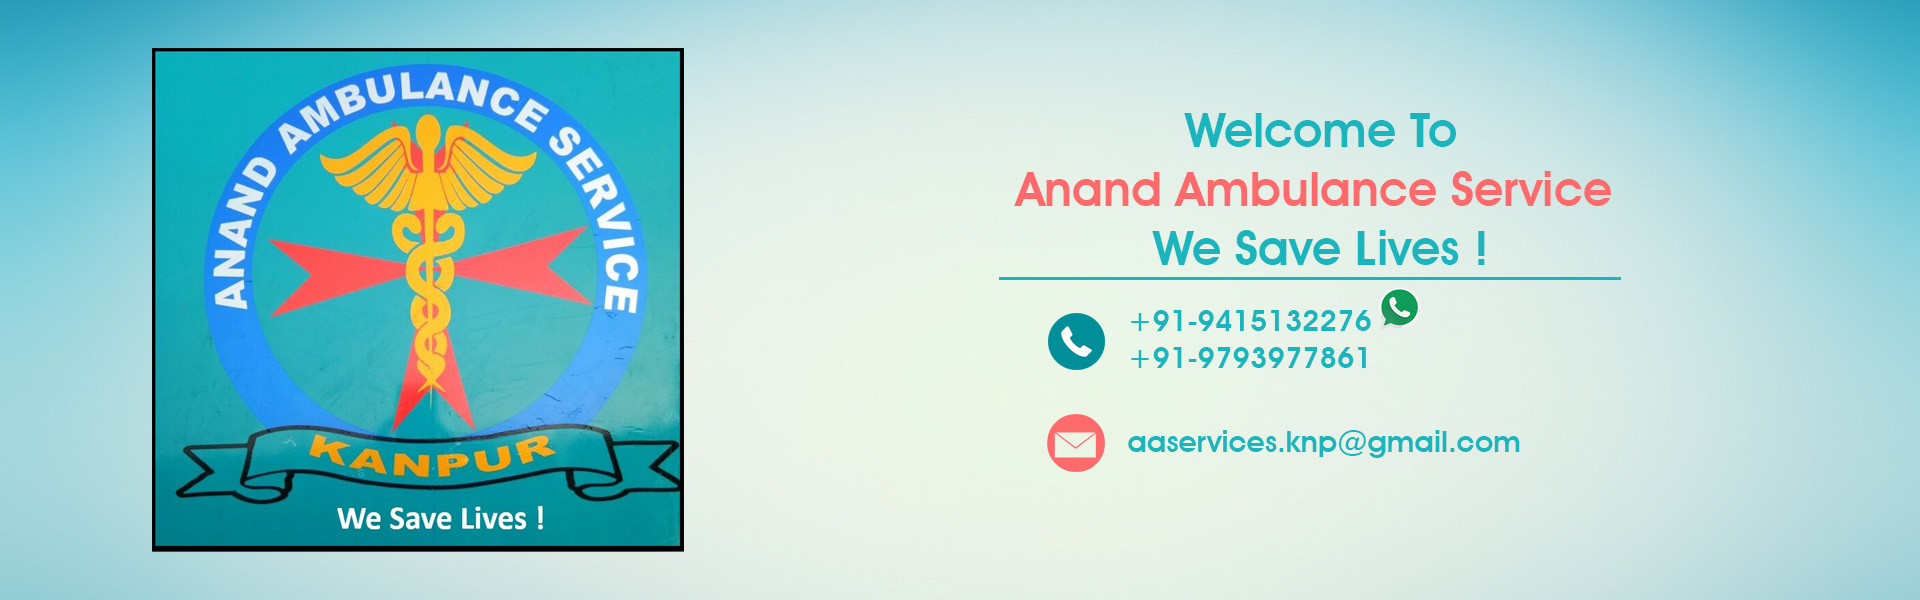 Anand Ambulance Service Kanpur Contact details